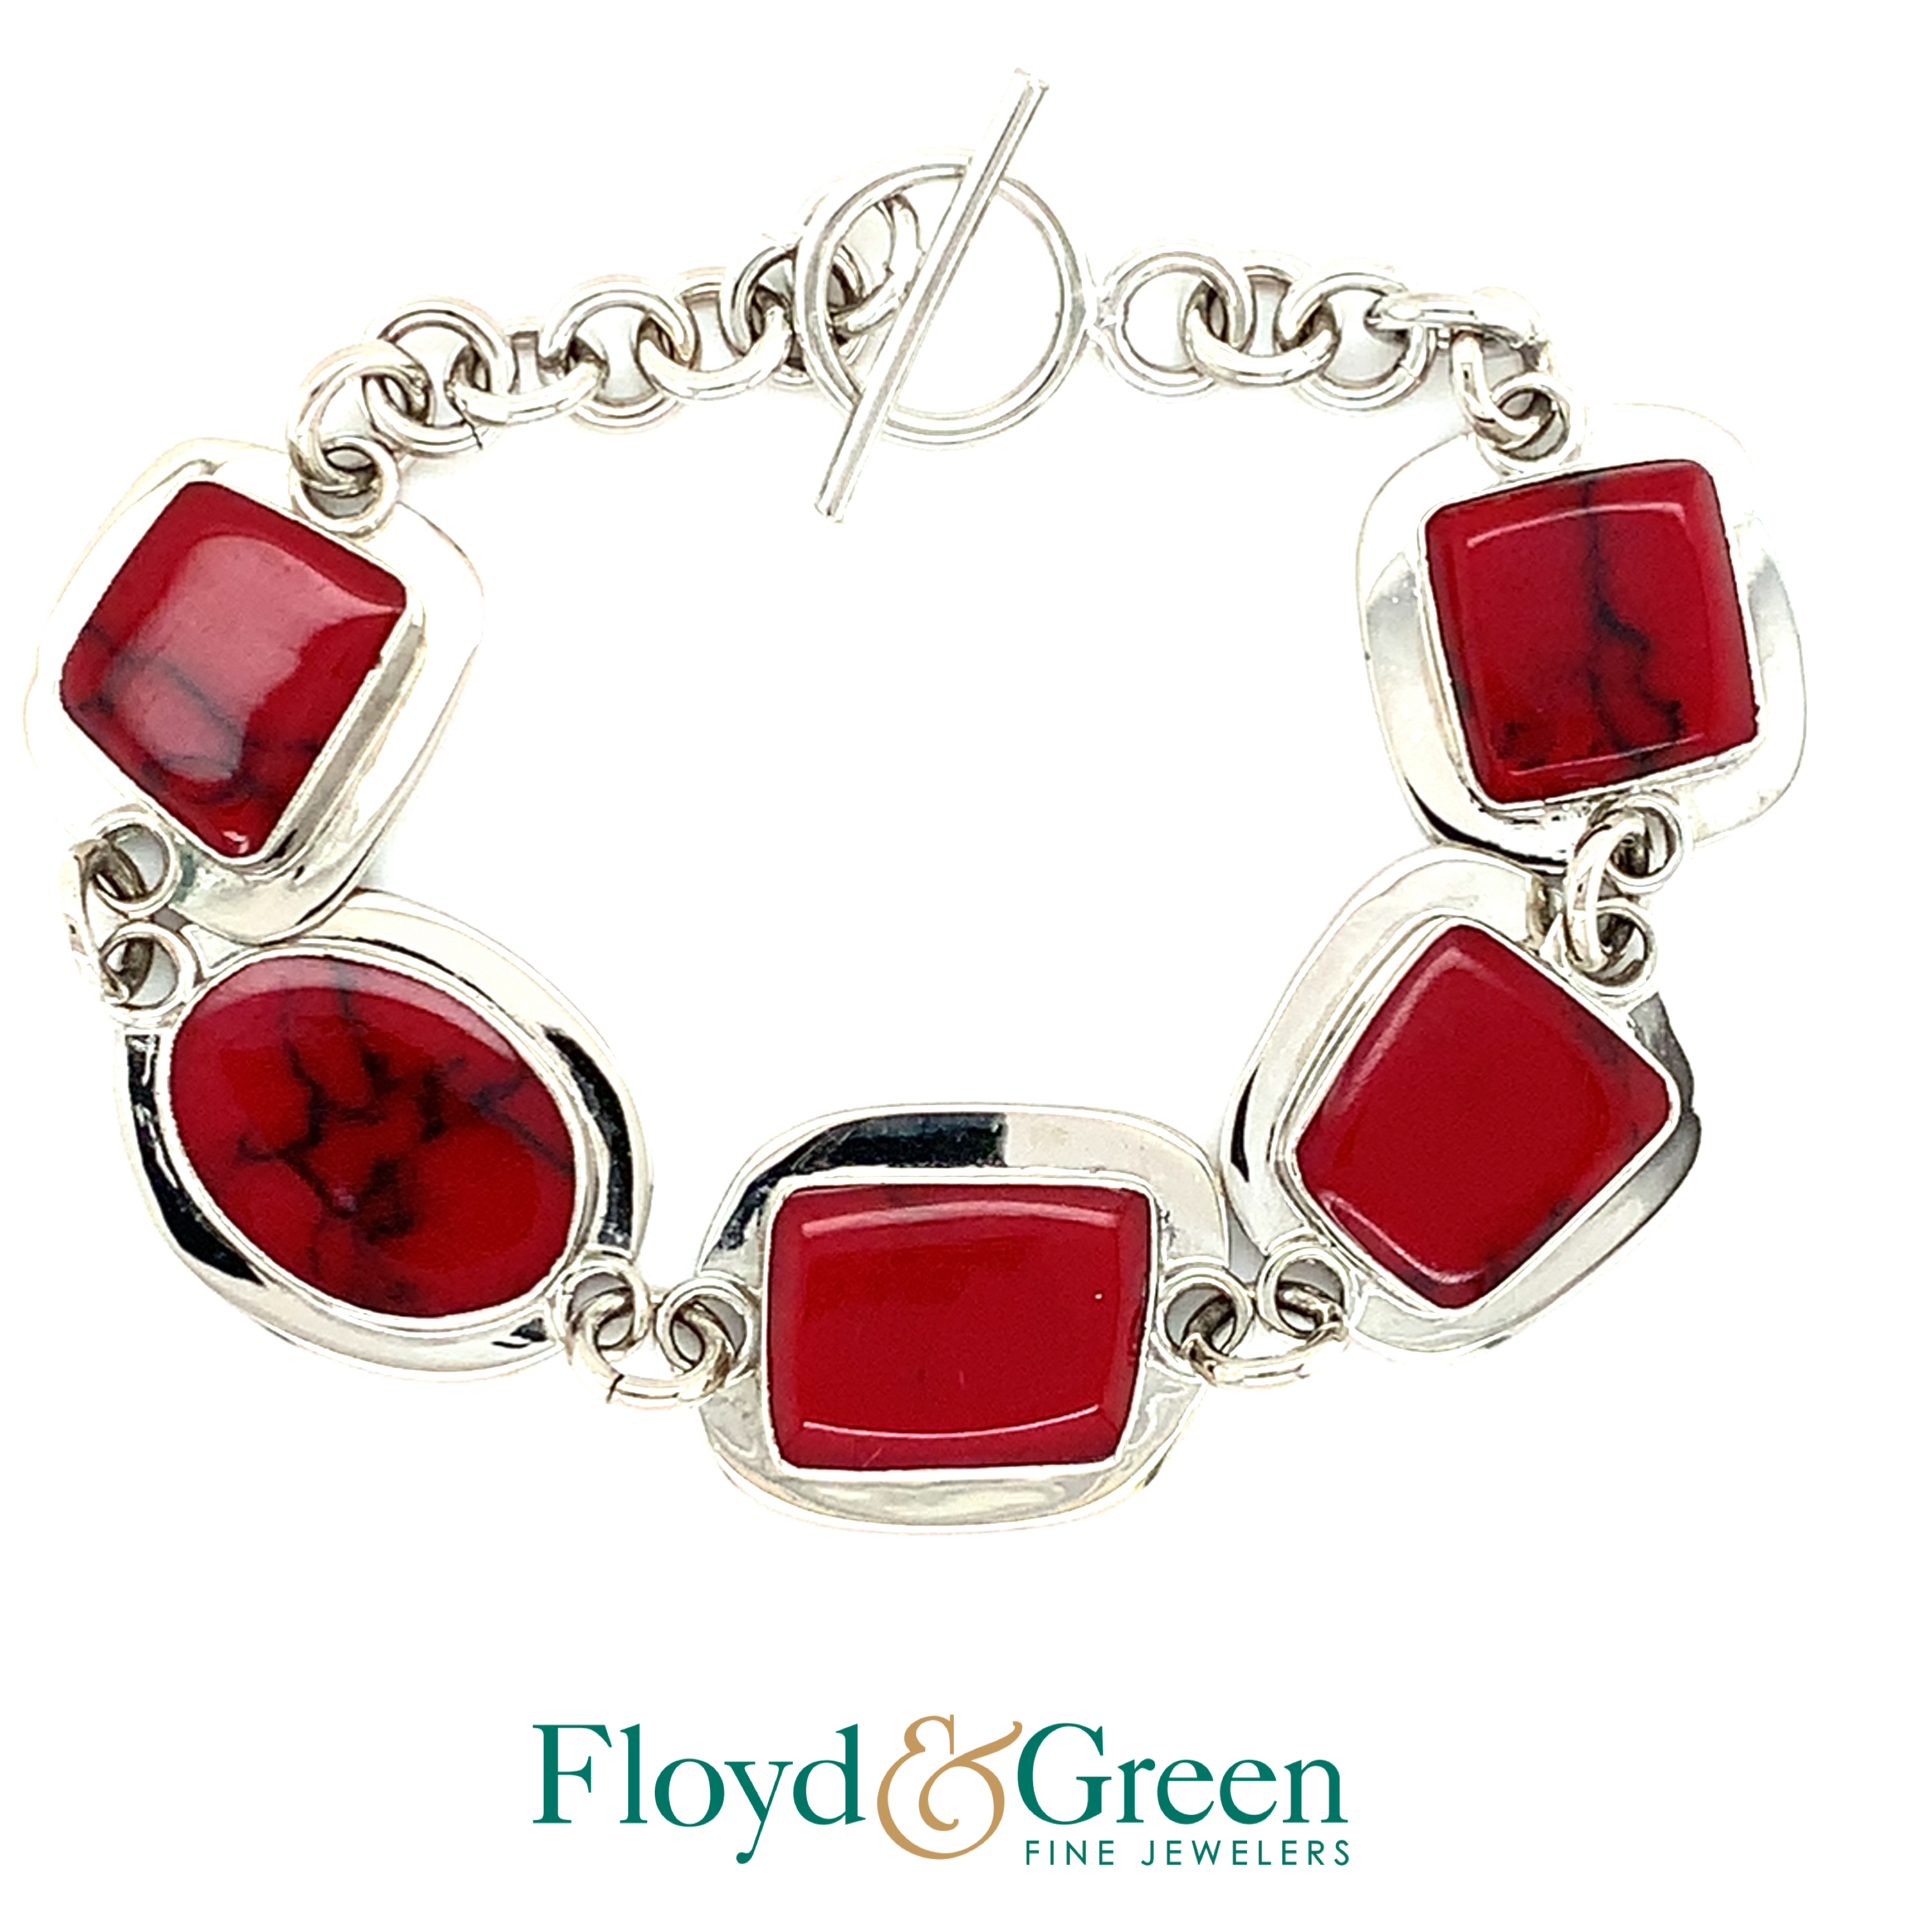 Sterling Silver Bracelet with 5 Red Glass Stones, 7 inch, 24.2g